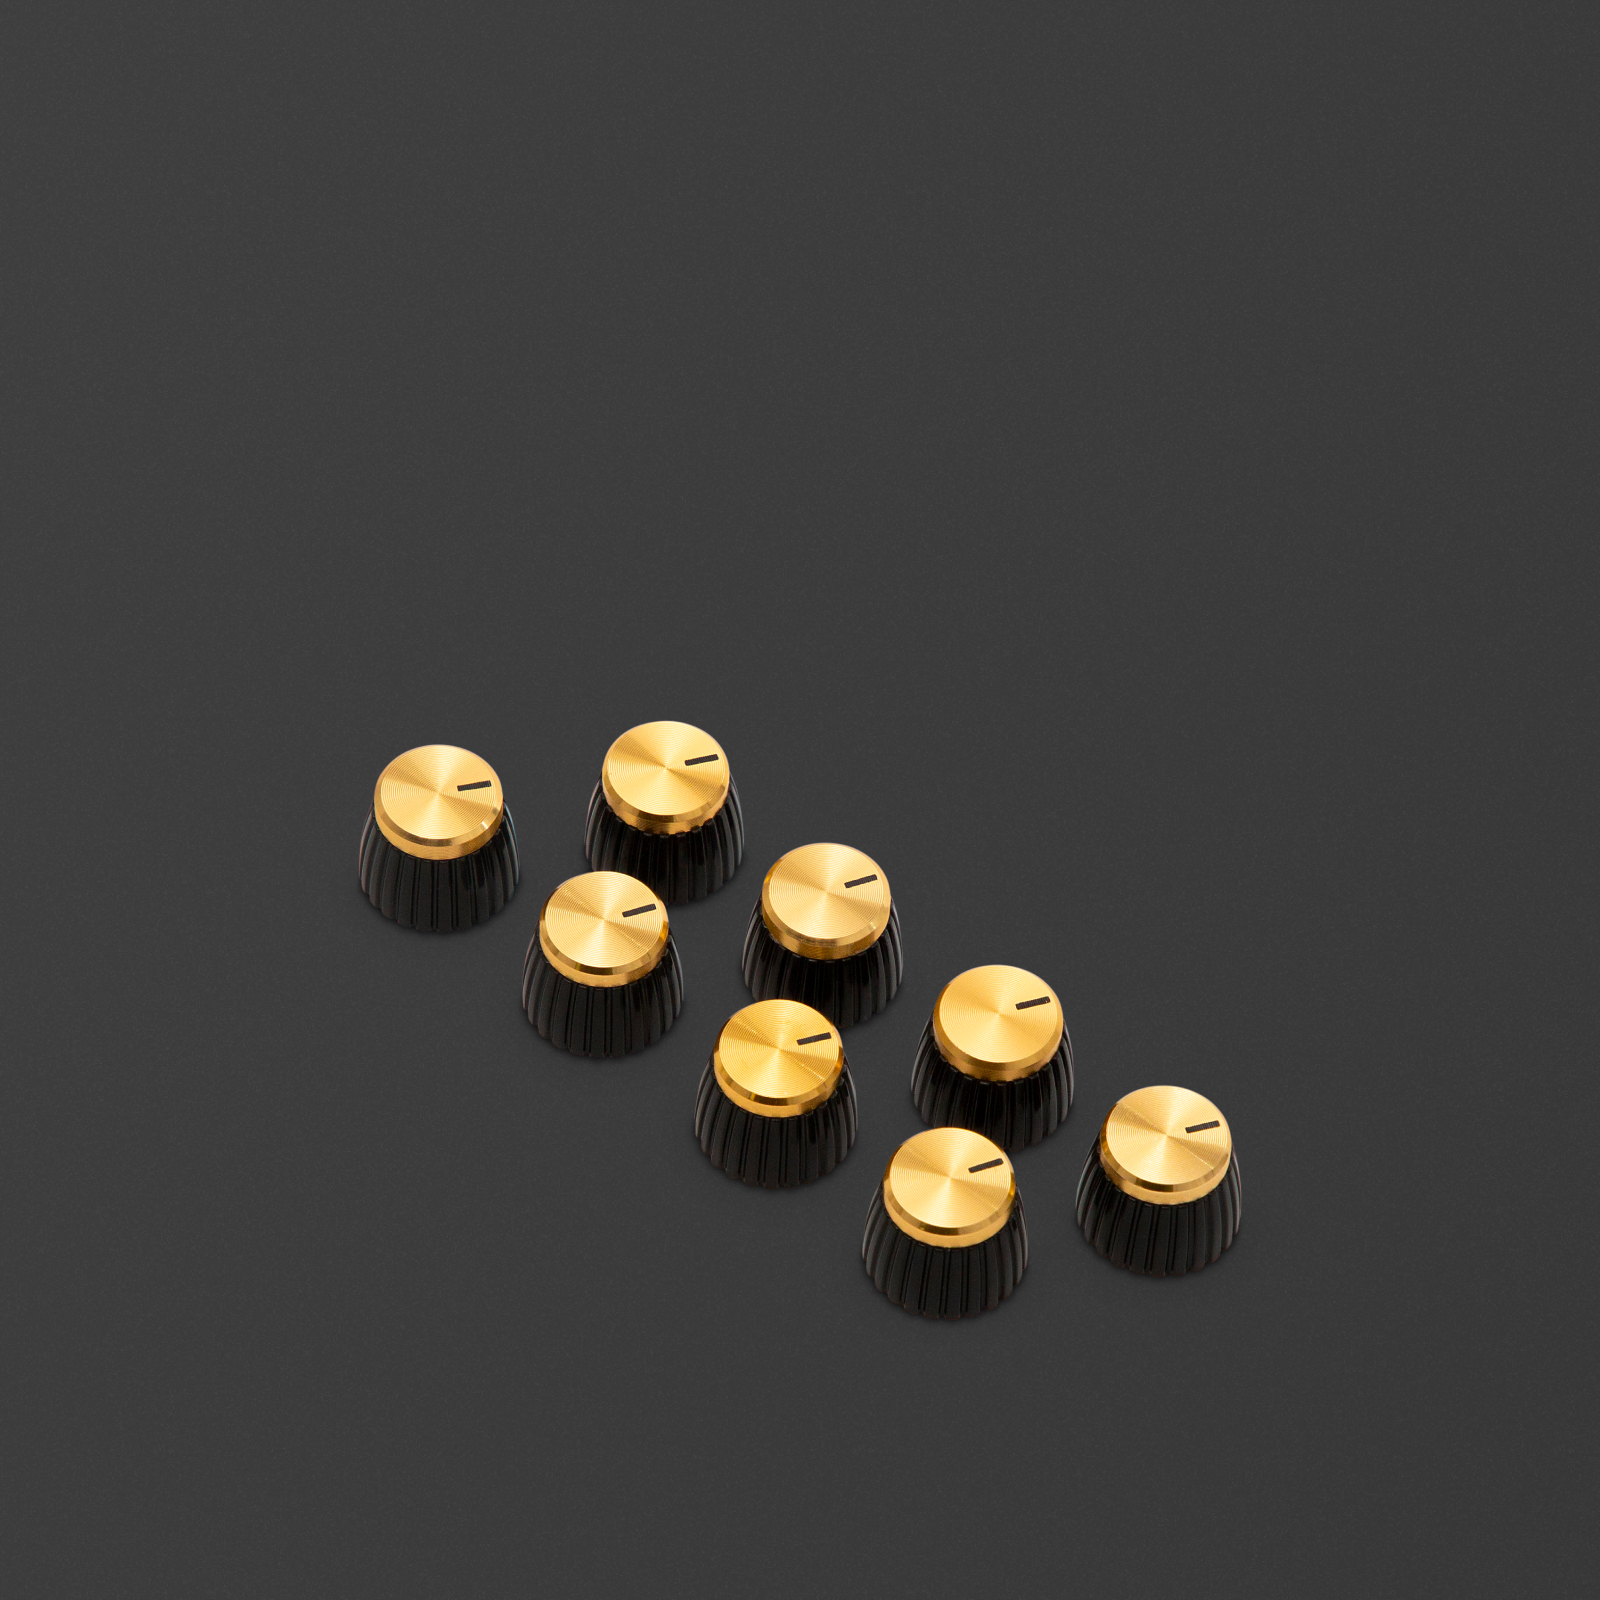 Pack of 8 gold d-shaft knobs where the marker points to the flat side of the d-shaft